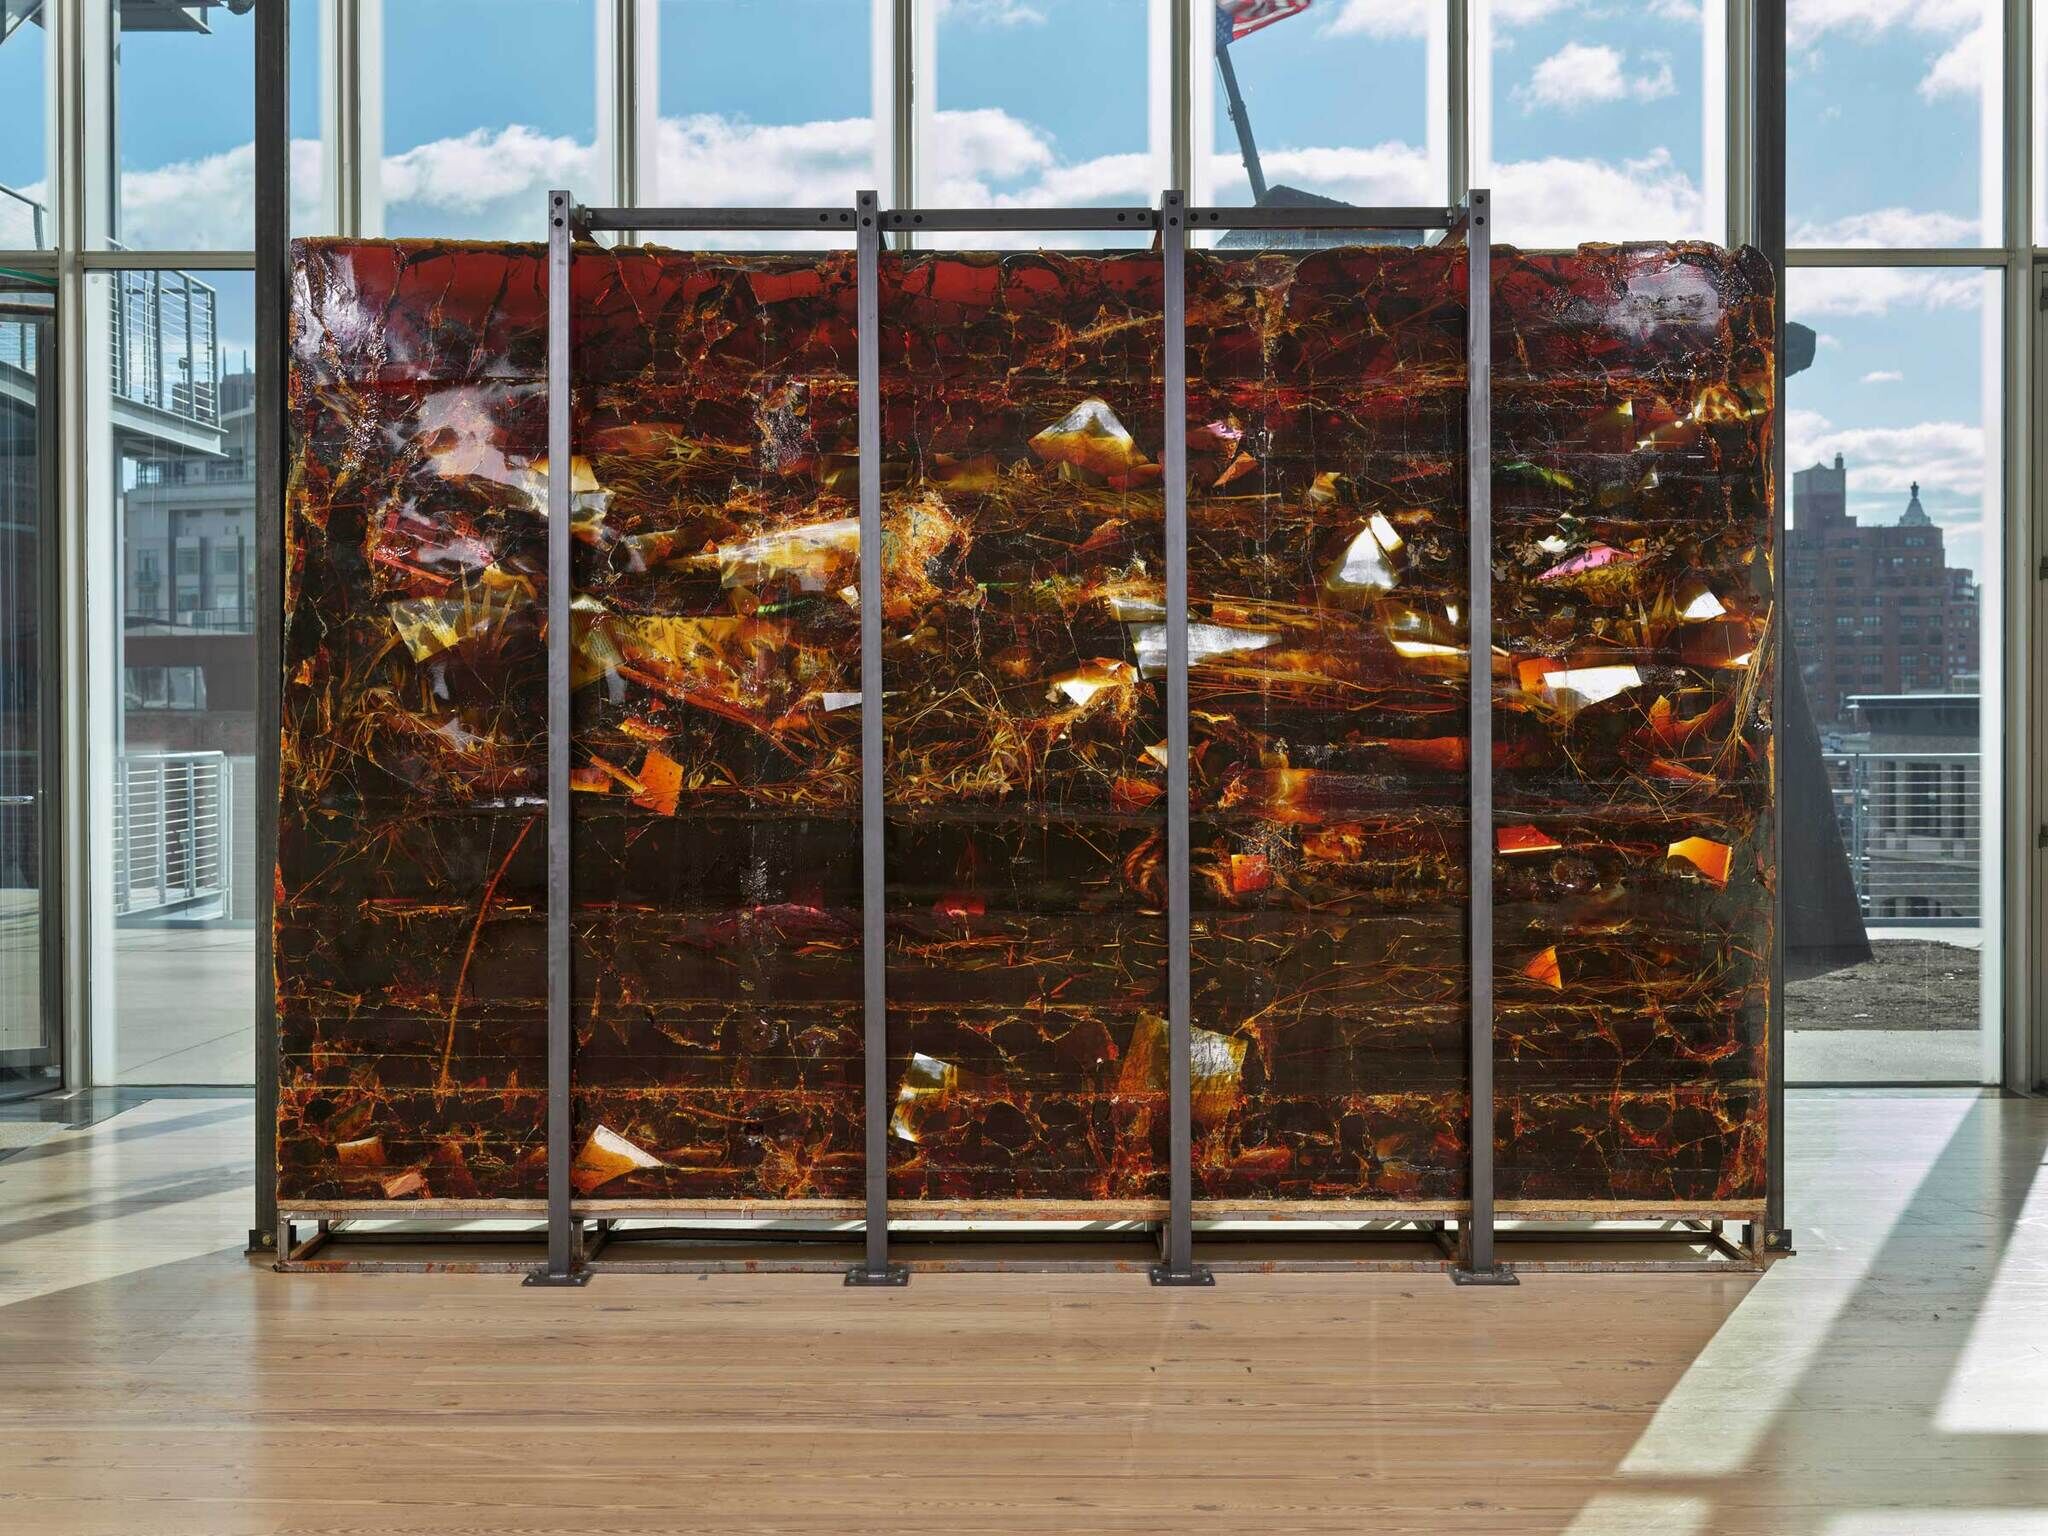 Large translucent art installation with amber hues in a room with floor-to-ceiling windows and cityscape views.